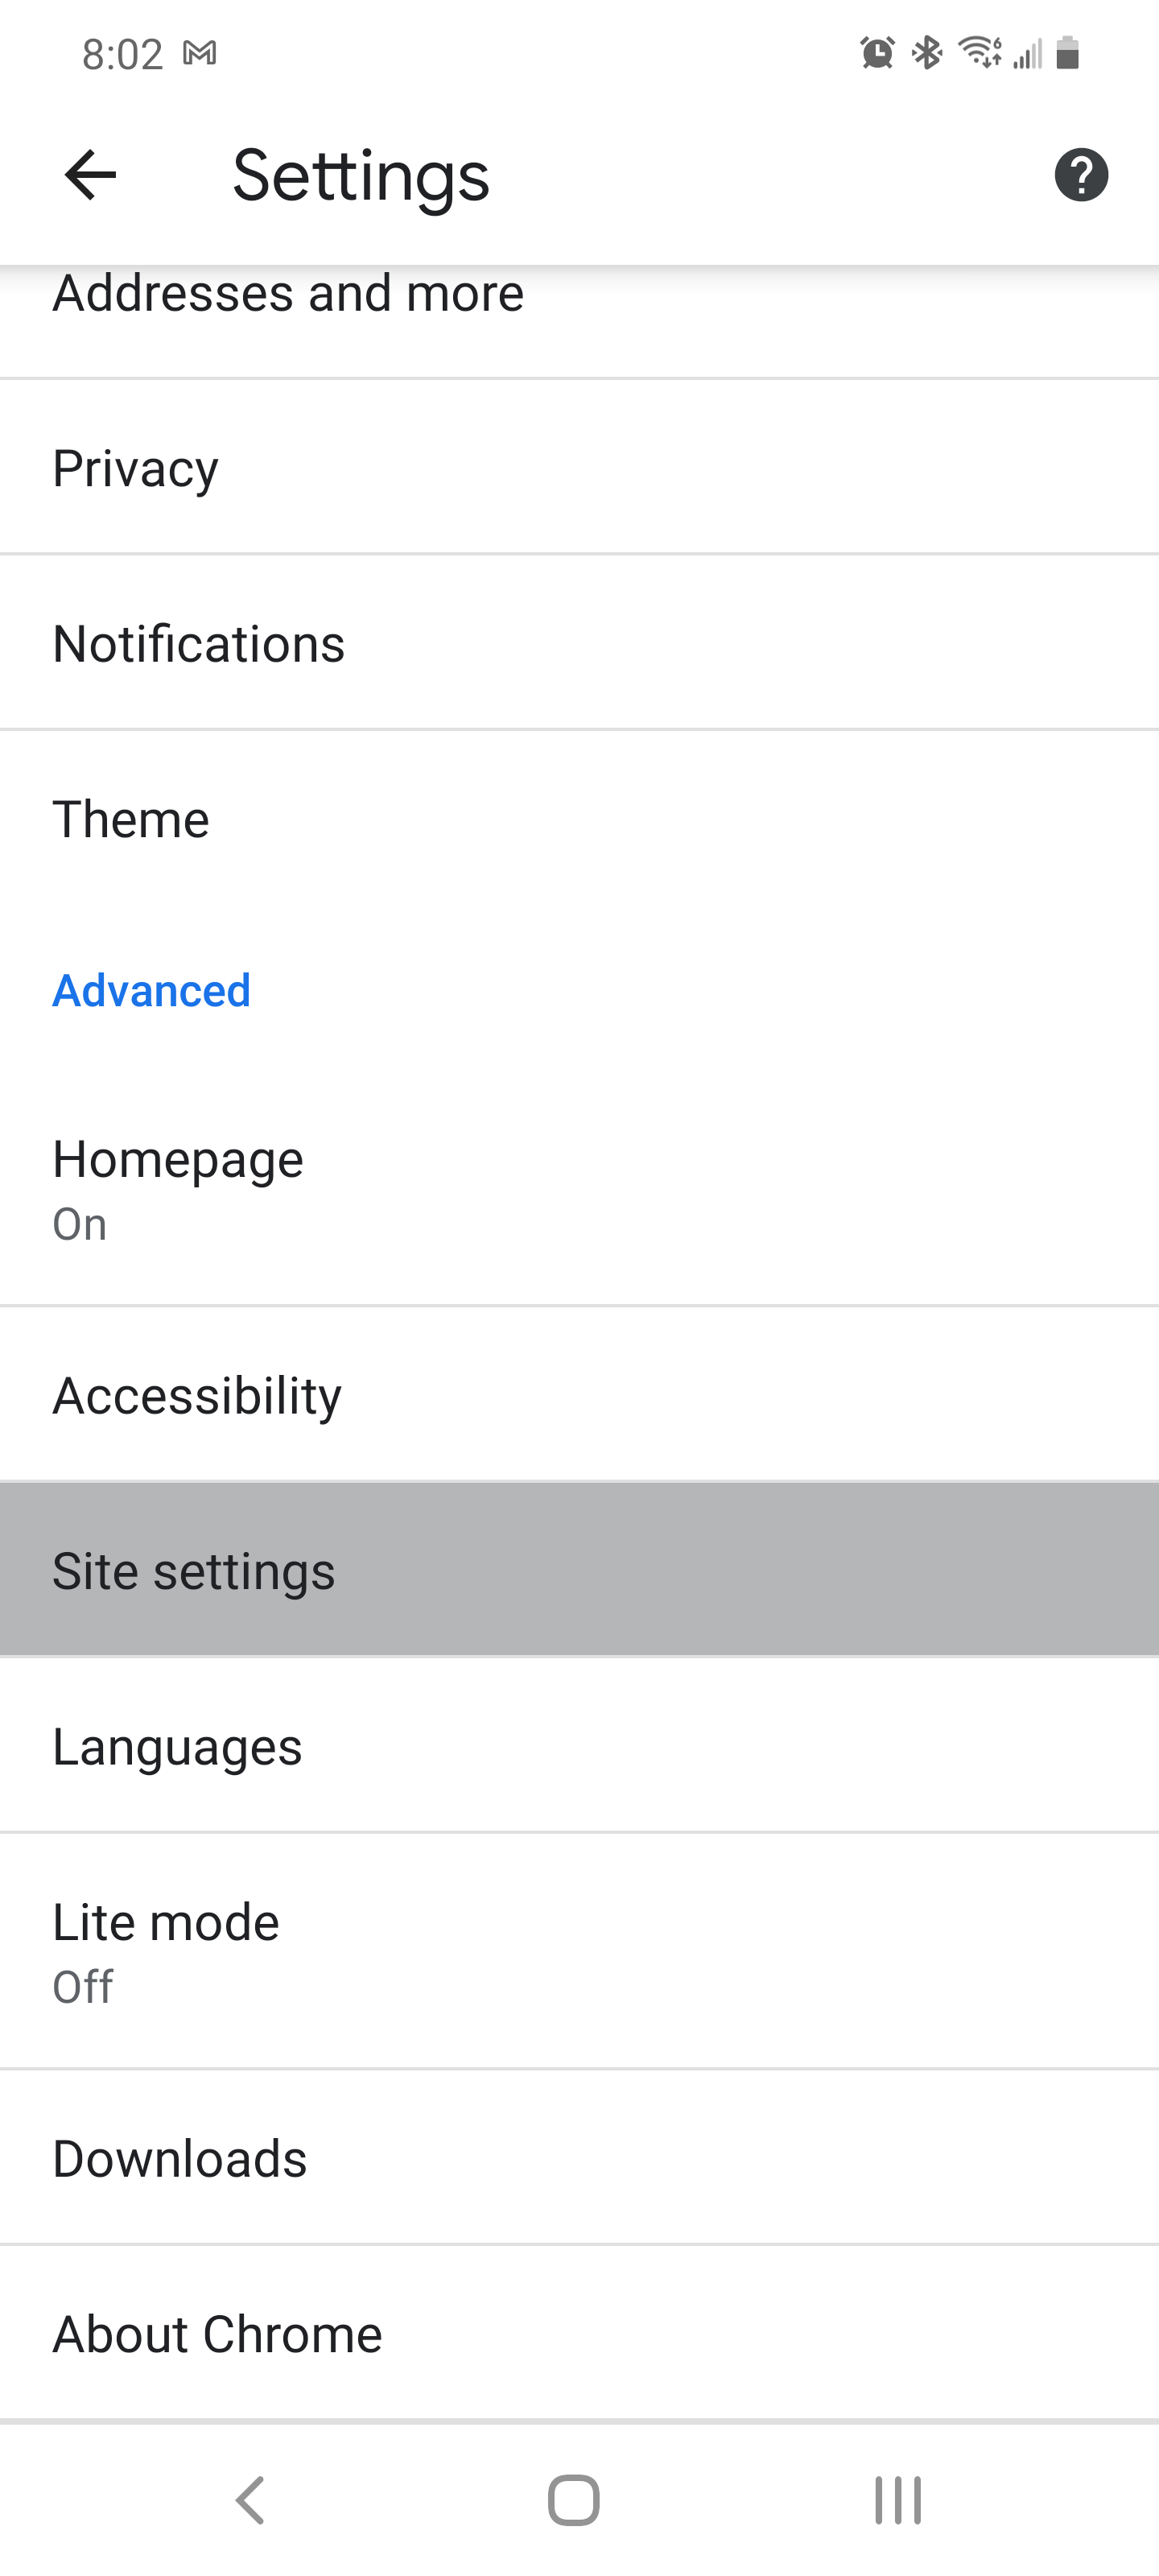 The Chrome mobile app's Settings menu with the Site settings option highlighted